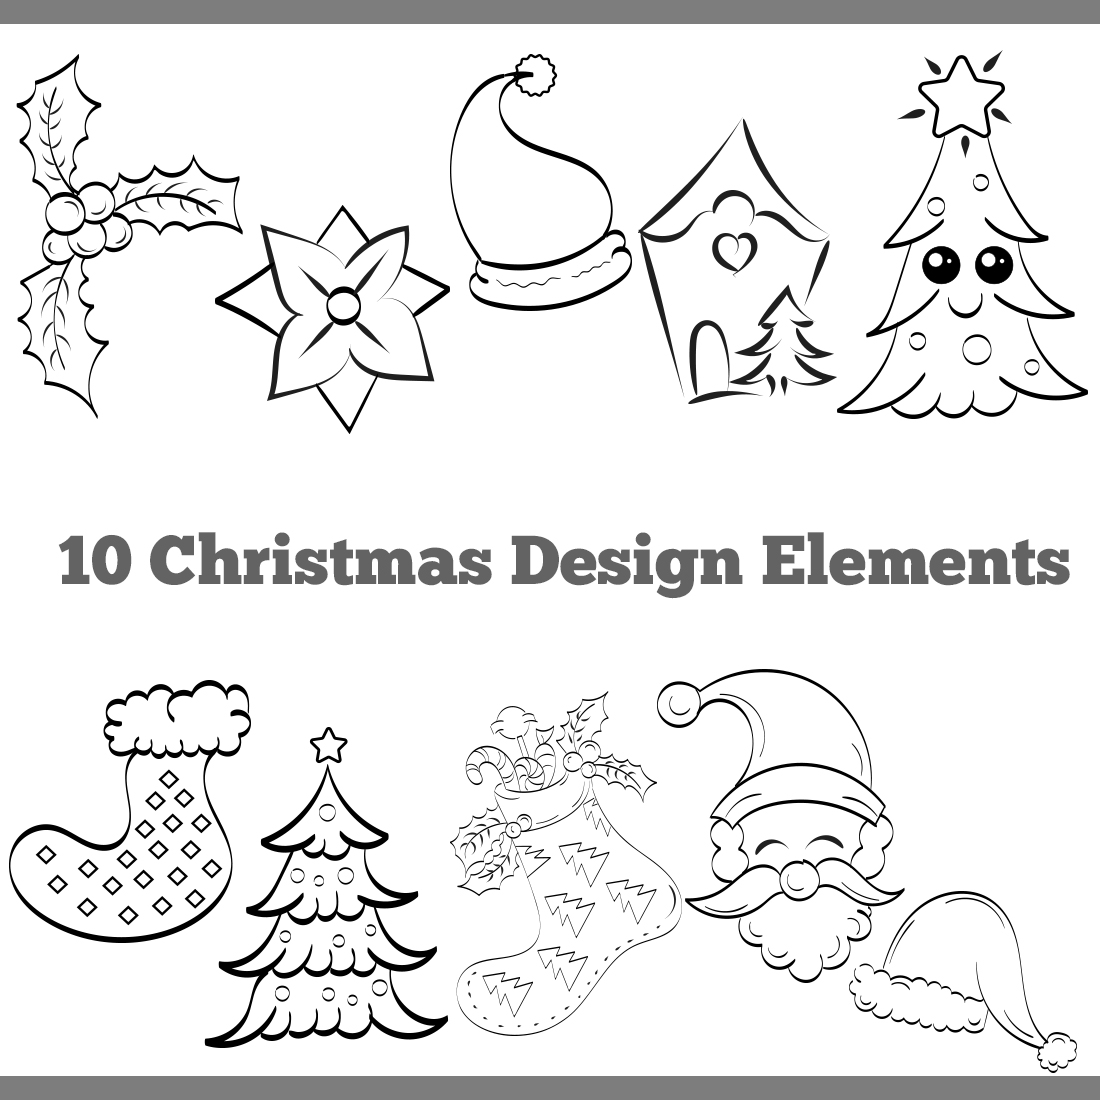 A selection of irresistible hand-drawn images on the New Year theme.